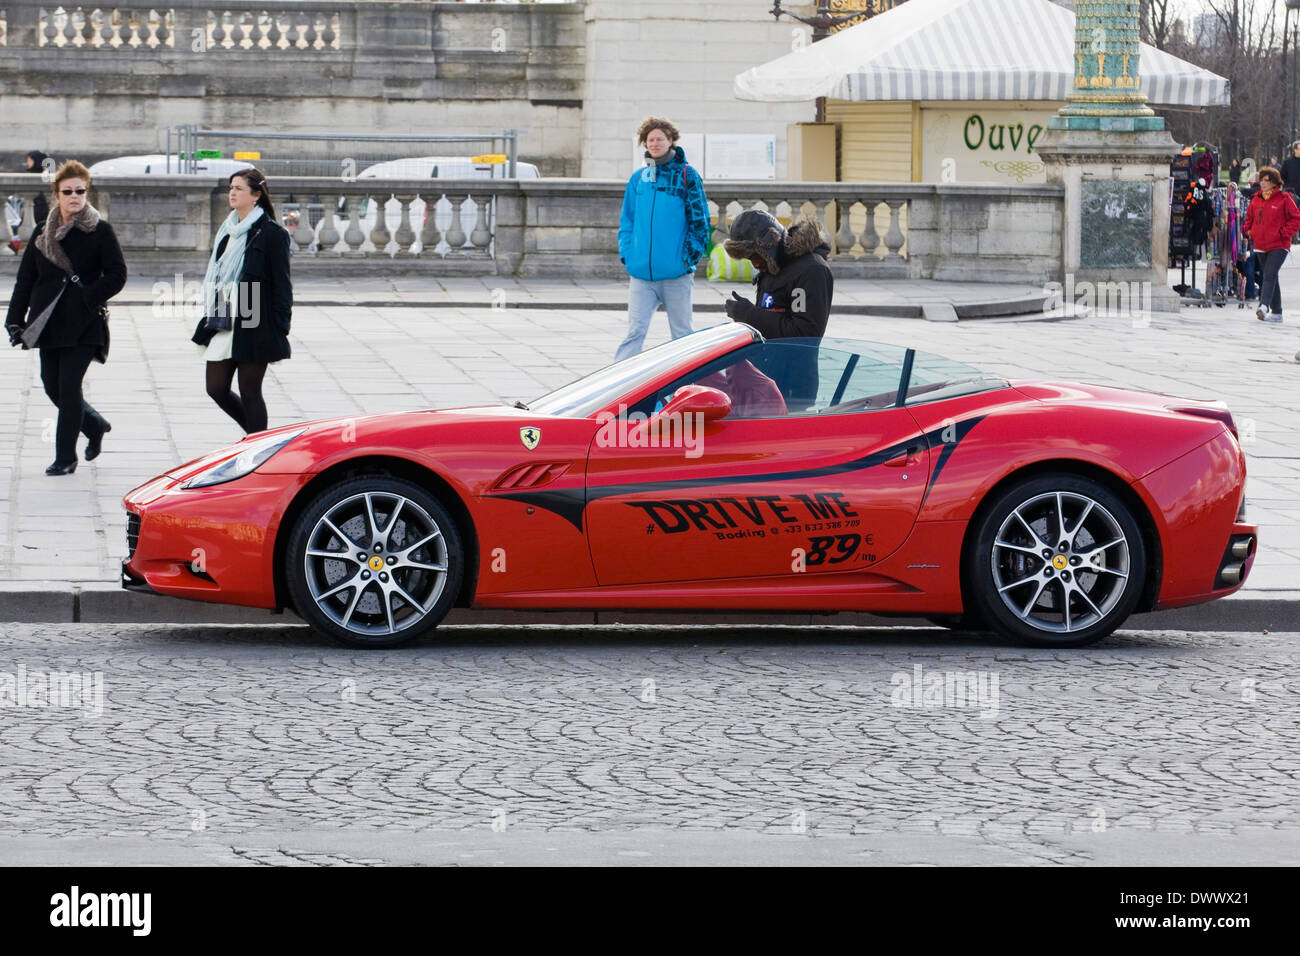 Man Stood by a Ferrari with Drove me on the side in the Place de la Concorde Paris France Stock Photo